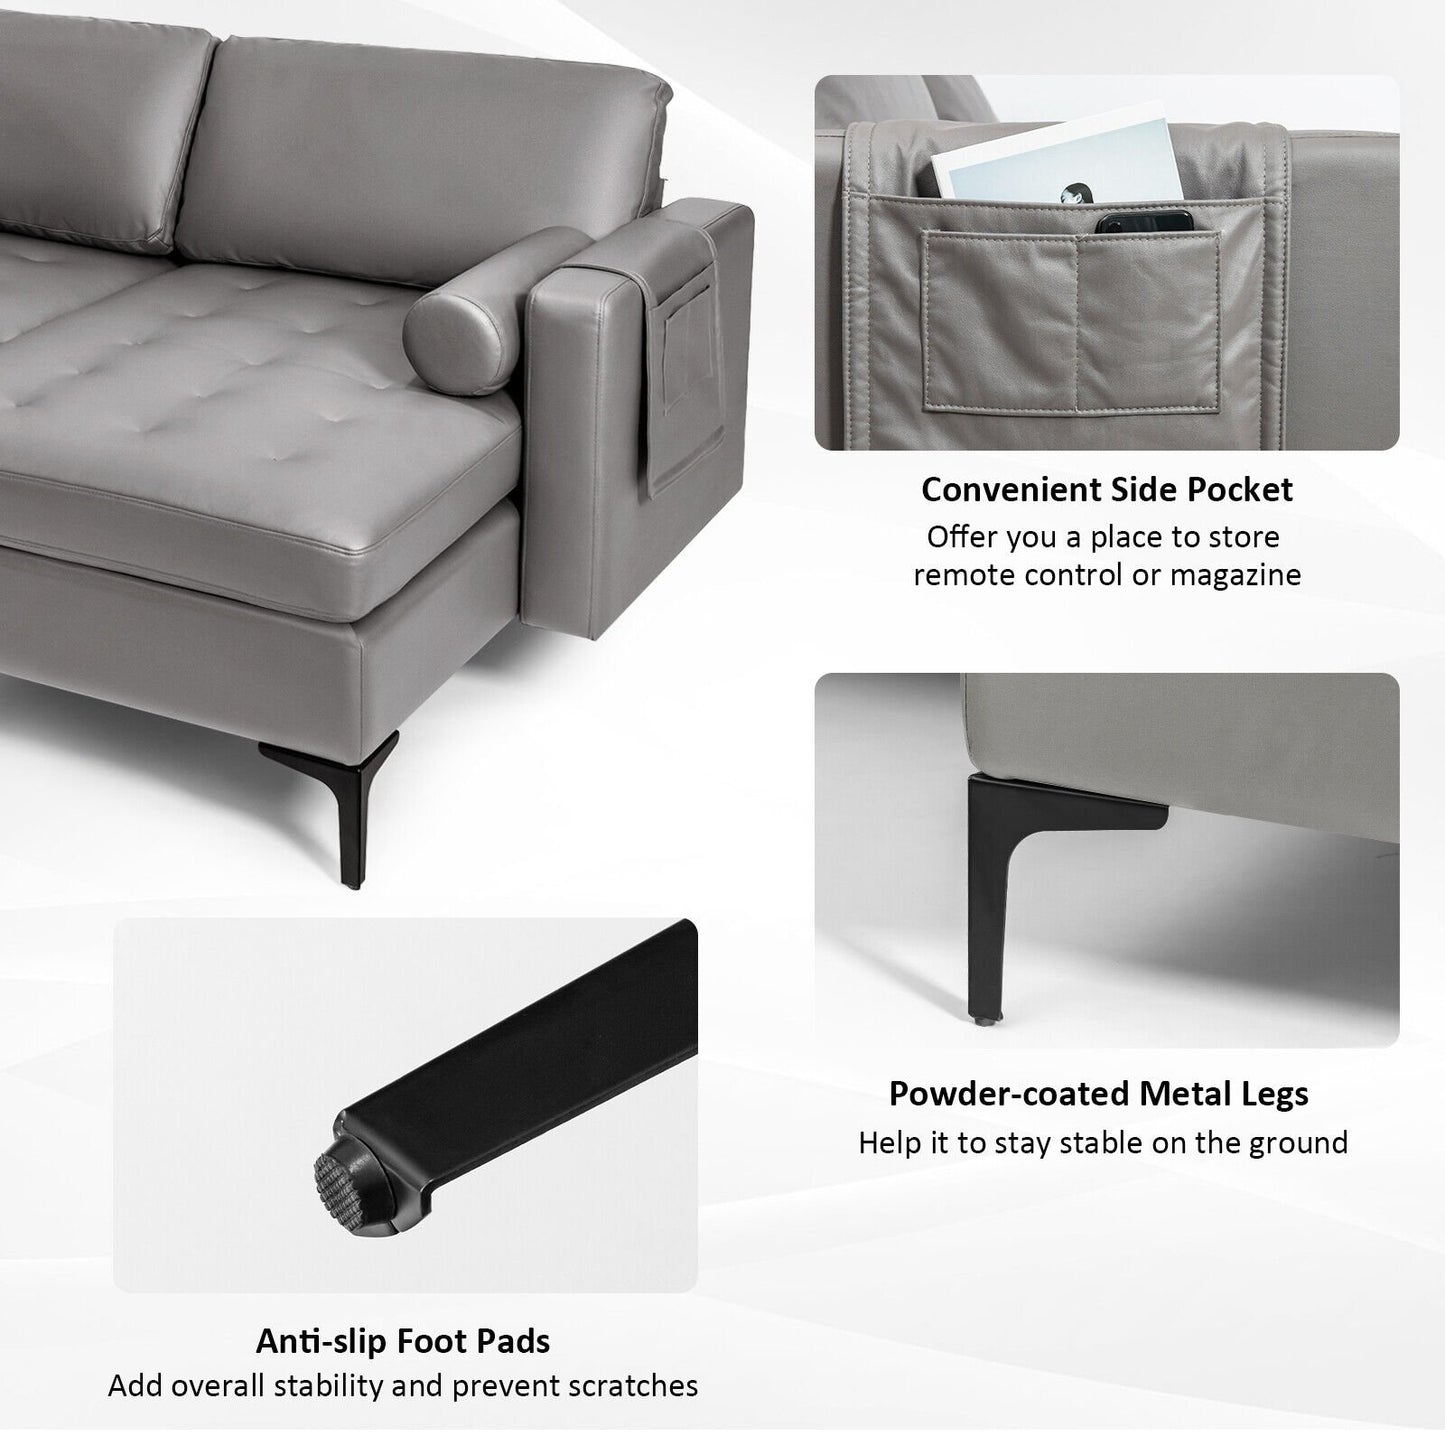 Modular L-shaped 3-Seat Sectional Sofa with Reversible Chaise and 2 USB Ports, Light Gray at Gallery Canada